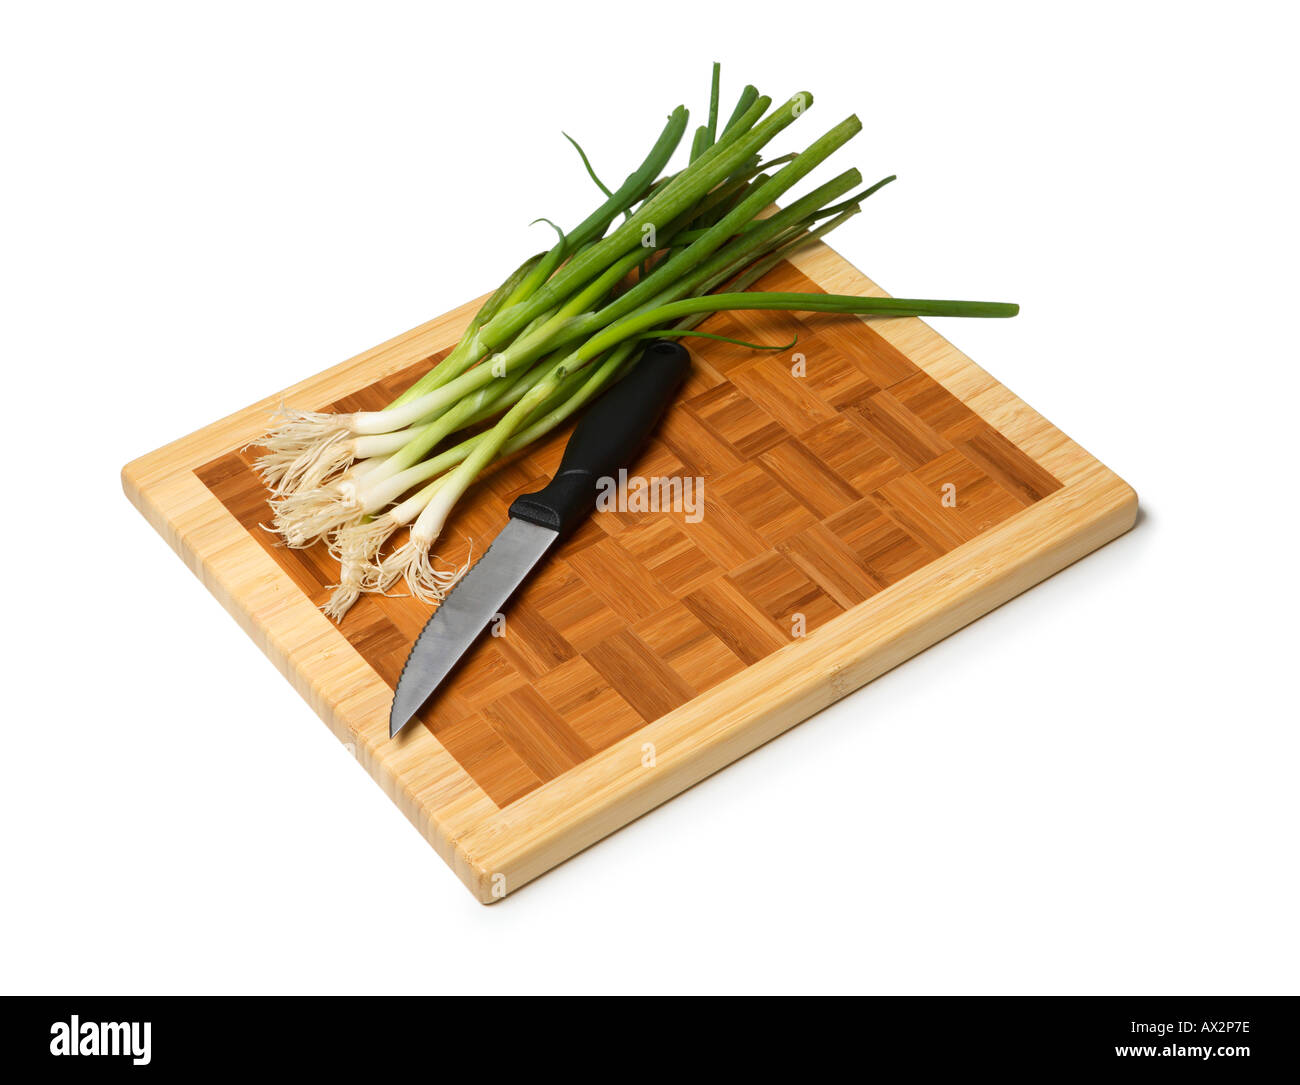 Oignons verts on cutting board Banque D'Images